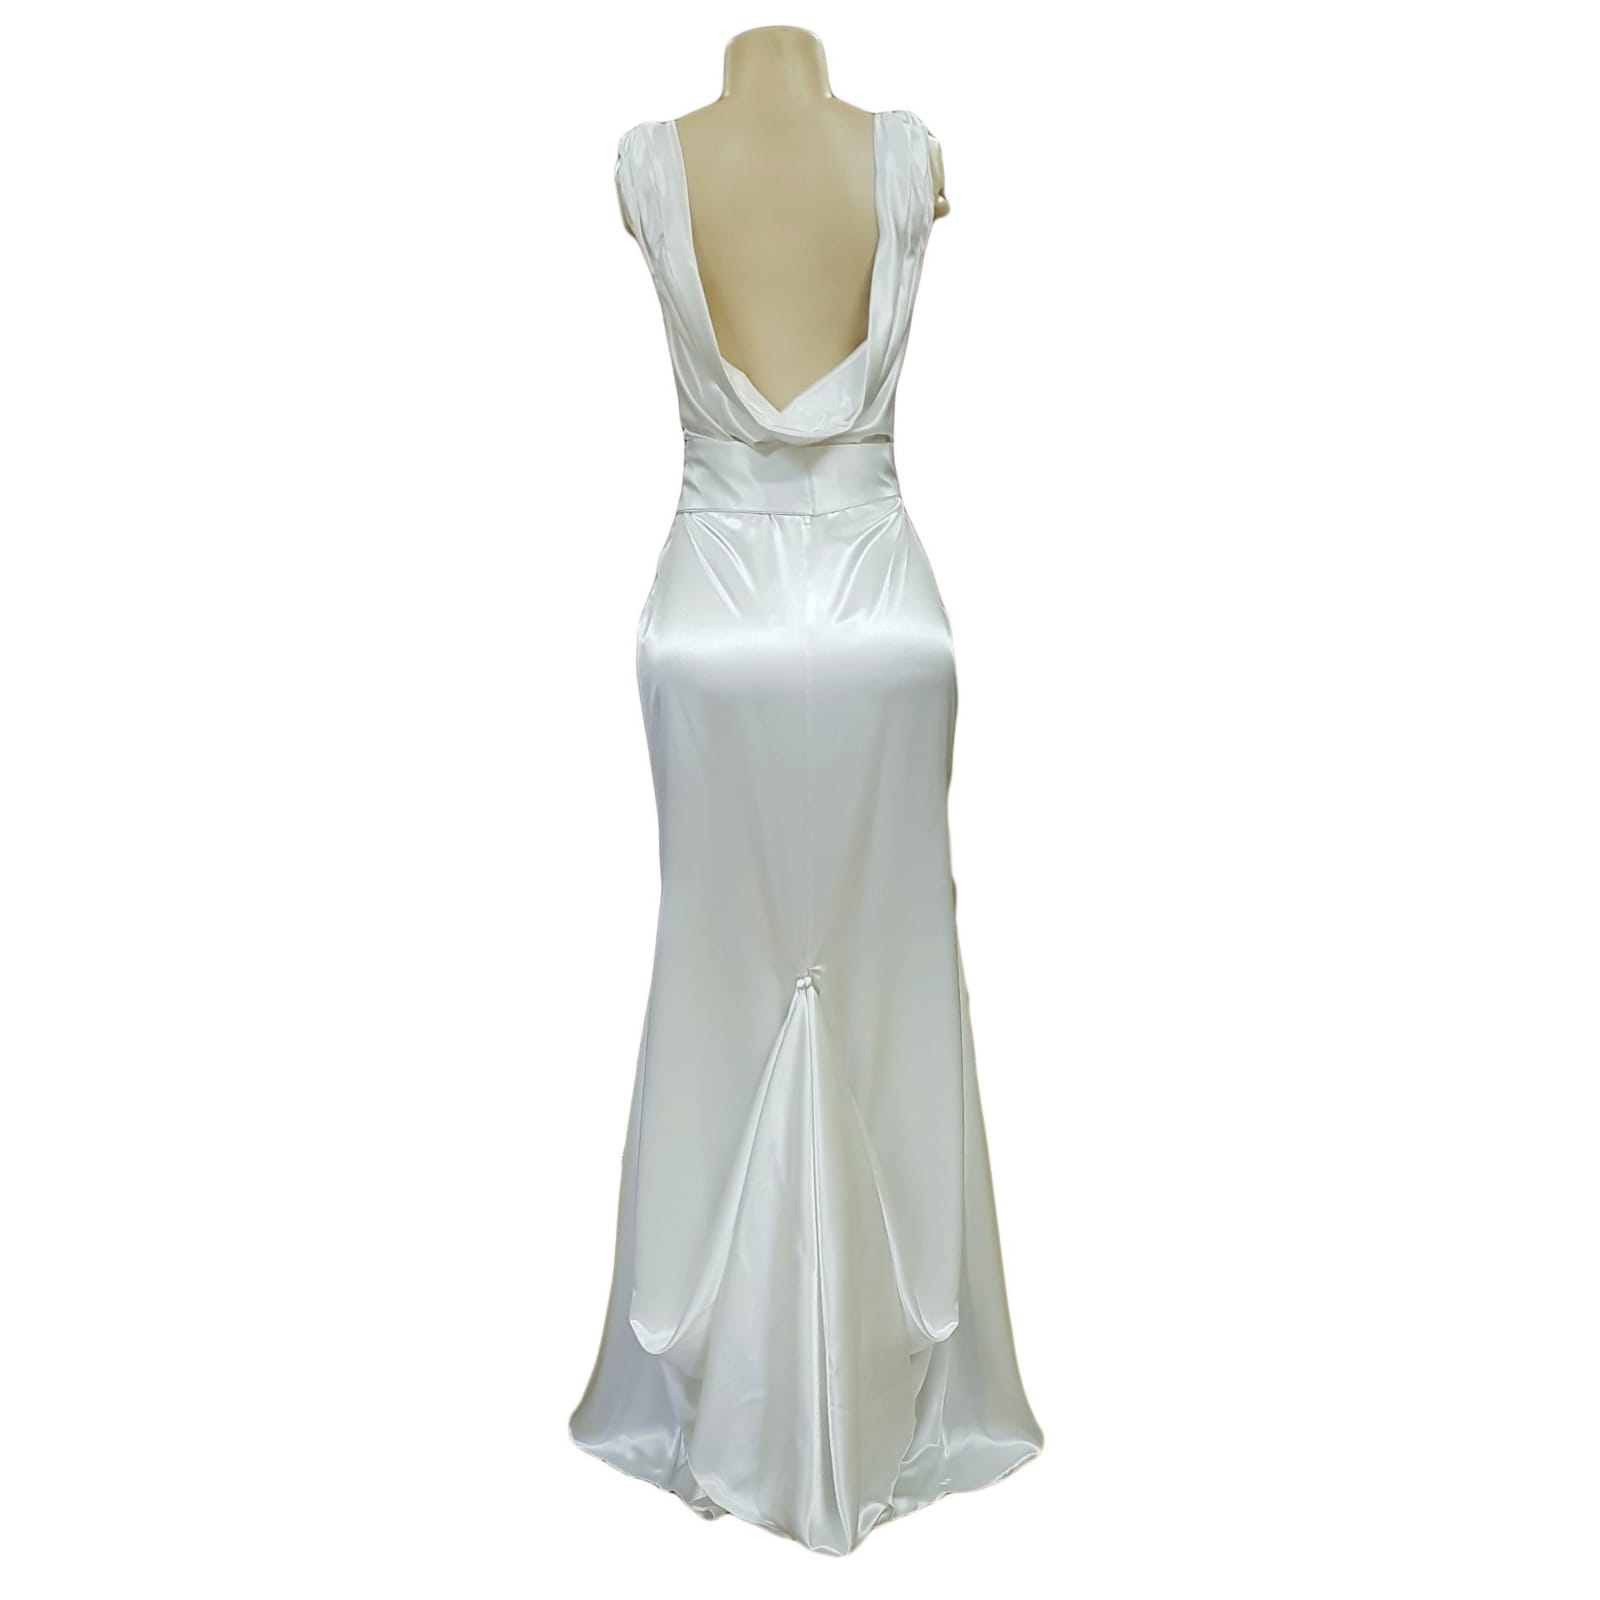 White satin soft mermaid wedding dress with silver belt detail 5 white satin soft mermaid wedding dress, cross busted neckline, open cowl neck back. Angled belt with diamante detail. Train with train hookup.